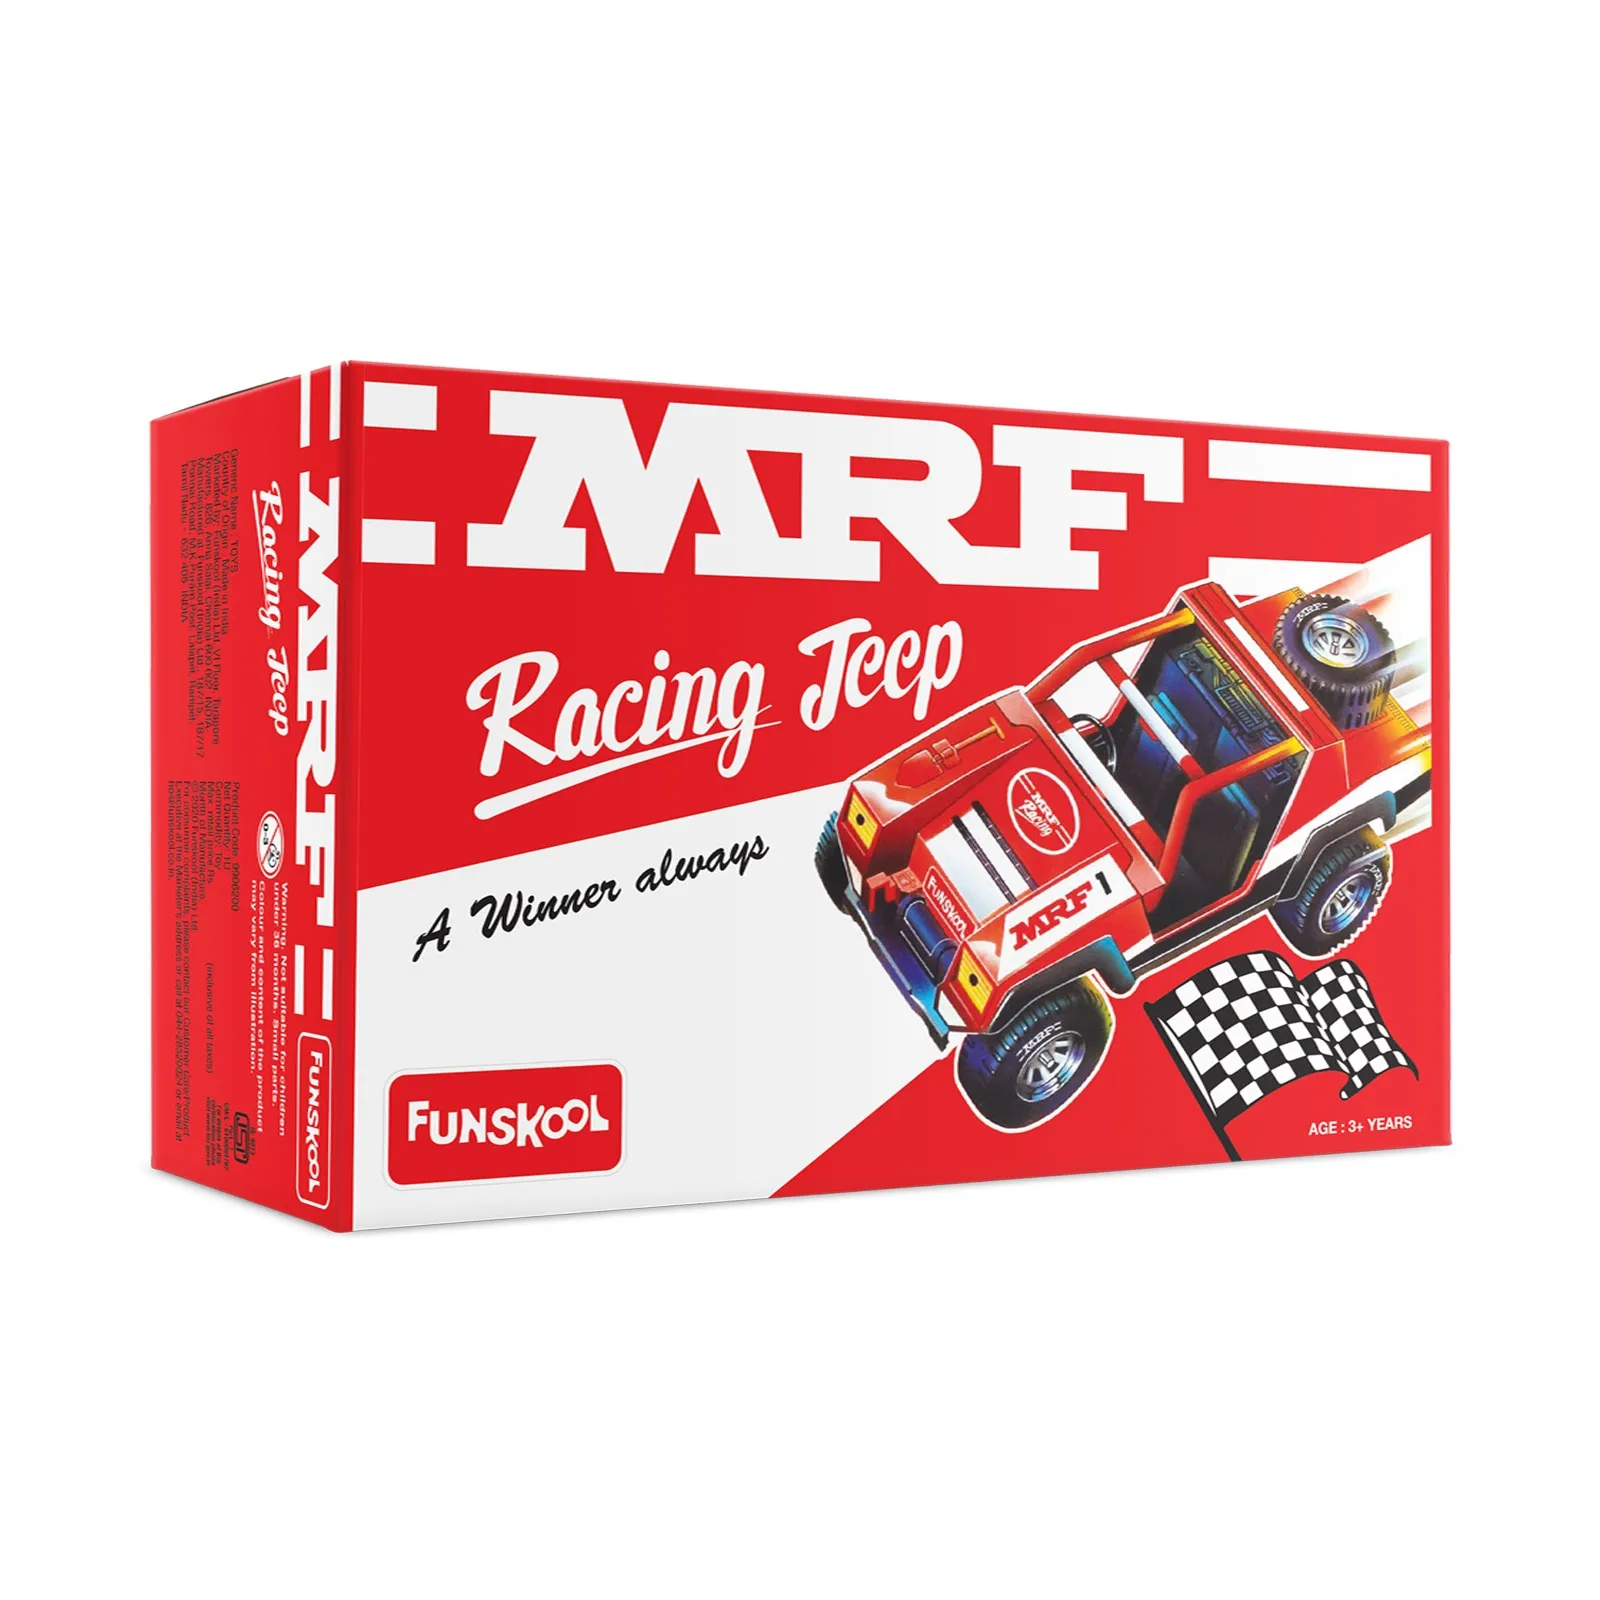 Funskool MRF Racing Jeep Red Colour Ready to Race